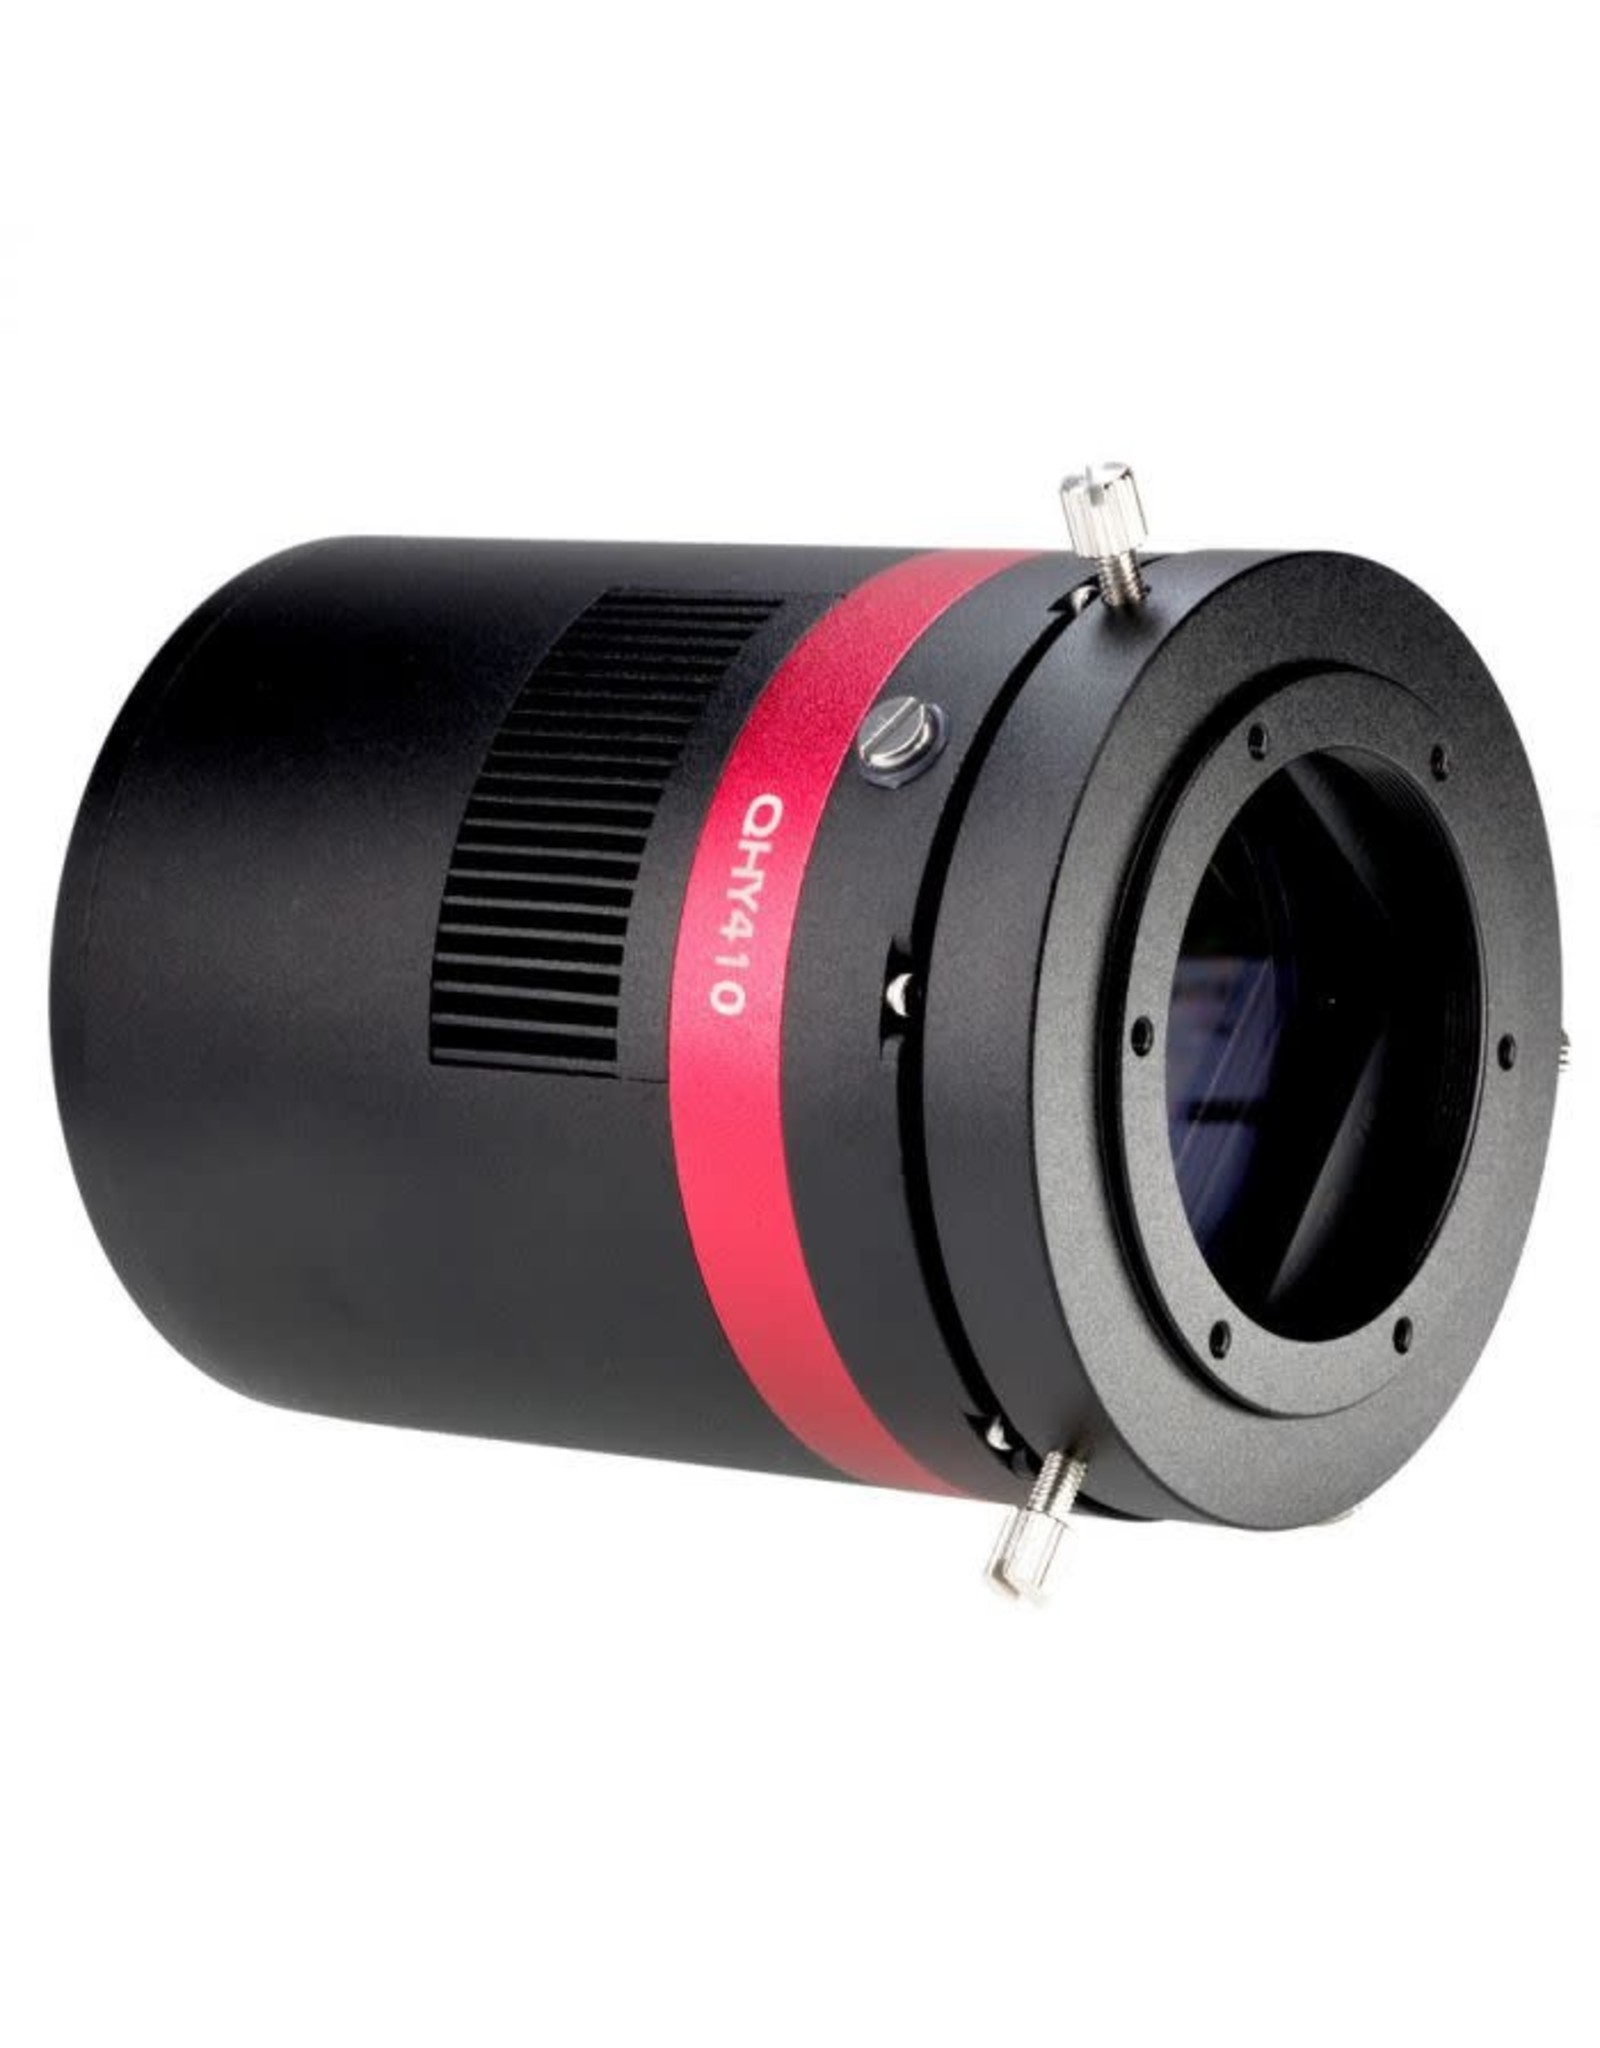 QHYCCD QHY410C Color Camera - Photographic Version